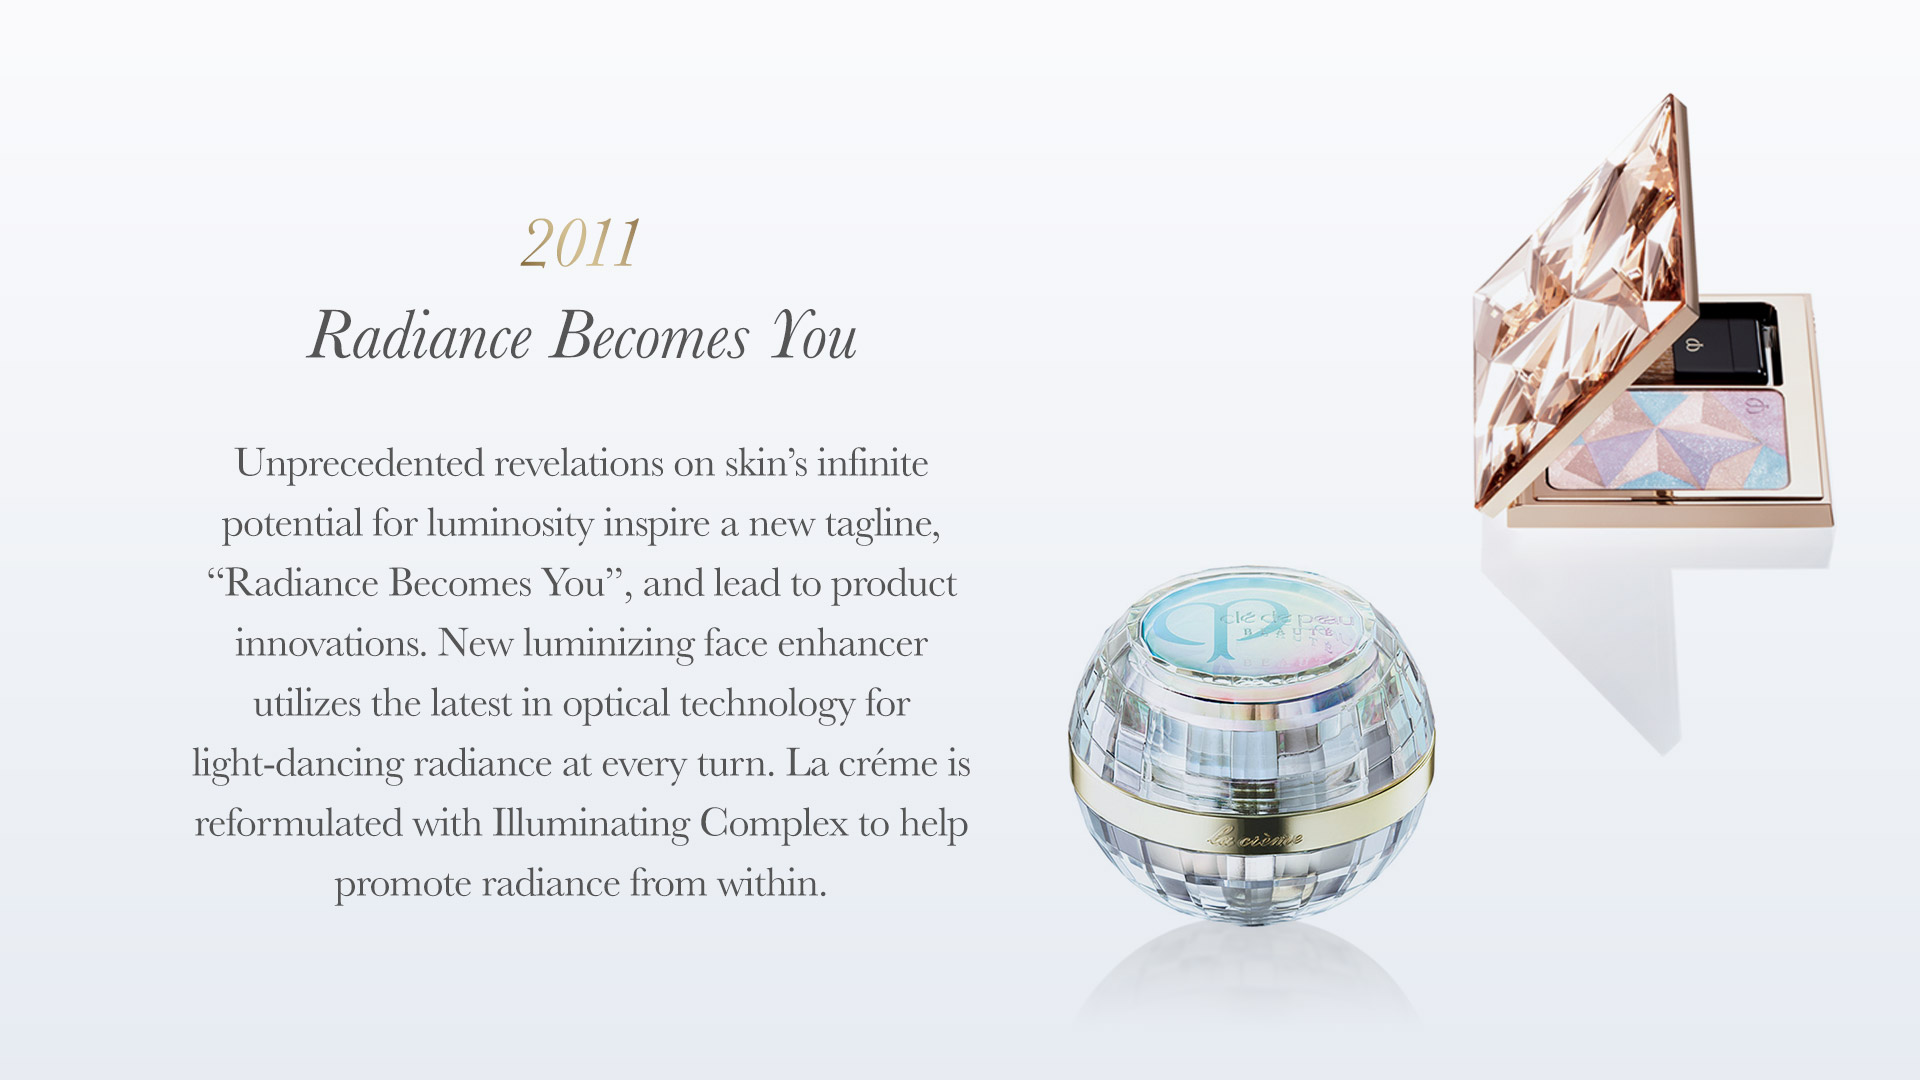 Unprecedented revelations on skin’s infinite potential forluminosity inspire a new tagline, &ldquo;radiance becomes you&rdquo;, and lead to product innovations. New Luminizing Face Enhancer utilizes the latest in optical technology for light-dancingradiance at every turn. la créme is reformulated withIlluminating Complex to help promote radiance from within.